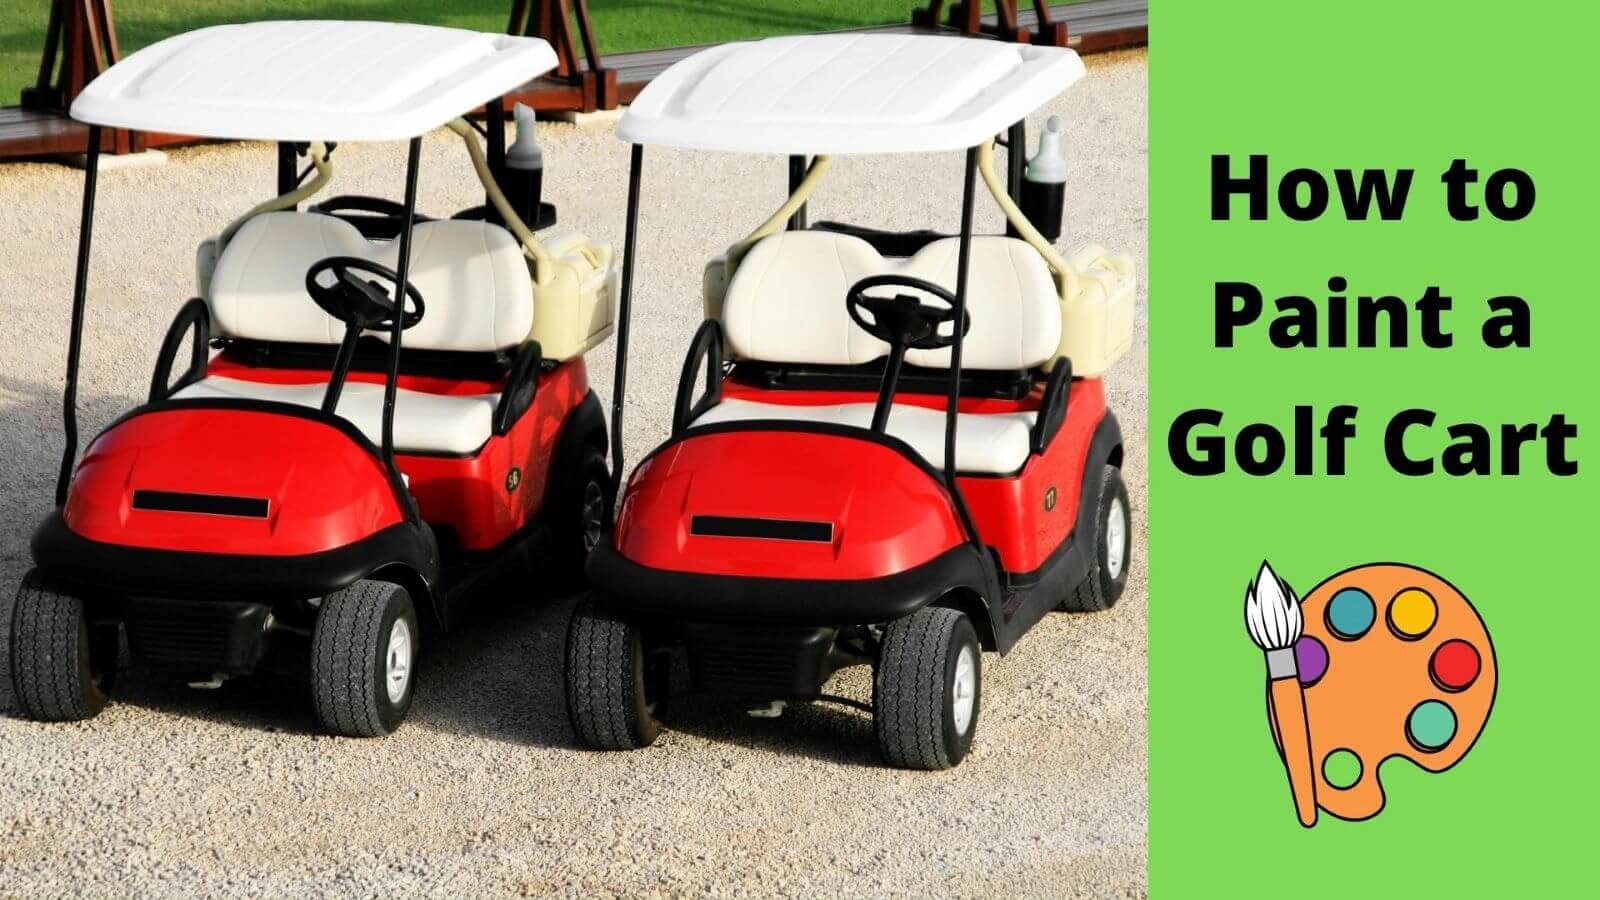 How to Paint a Golf Cart